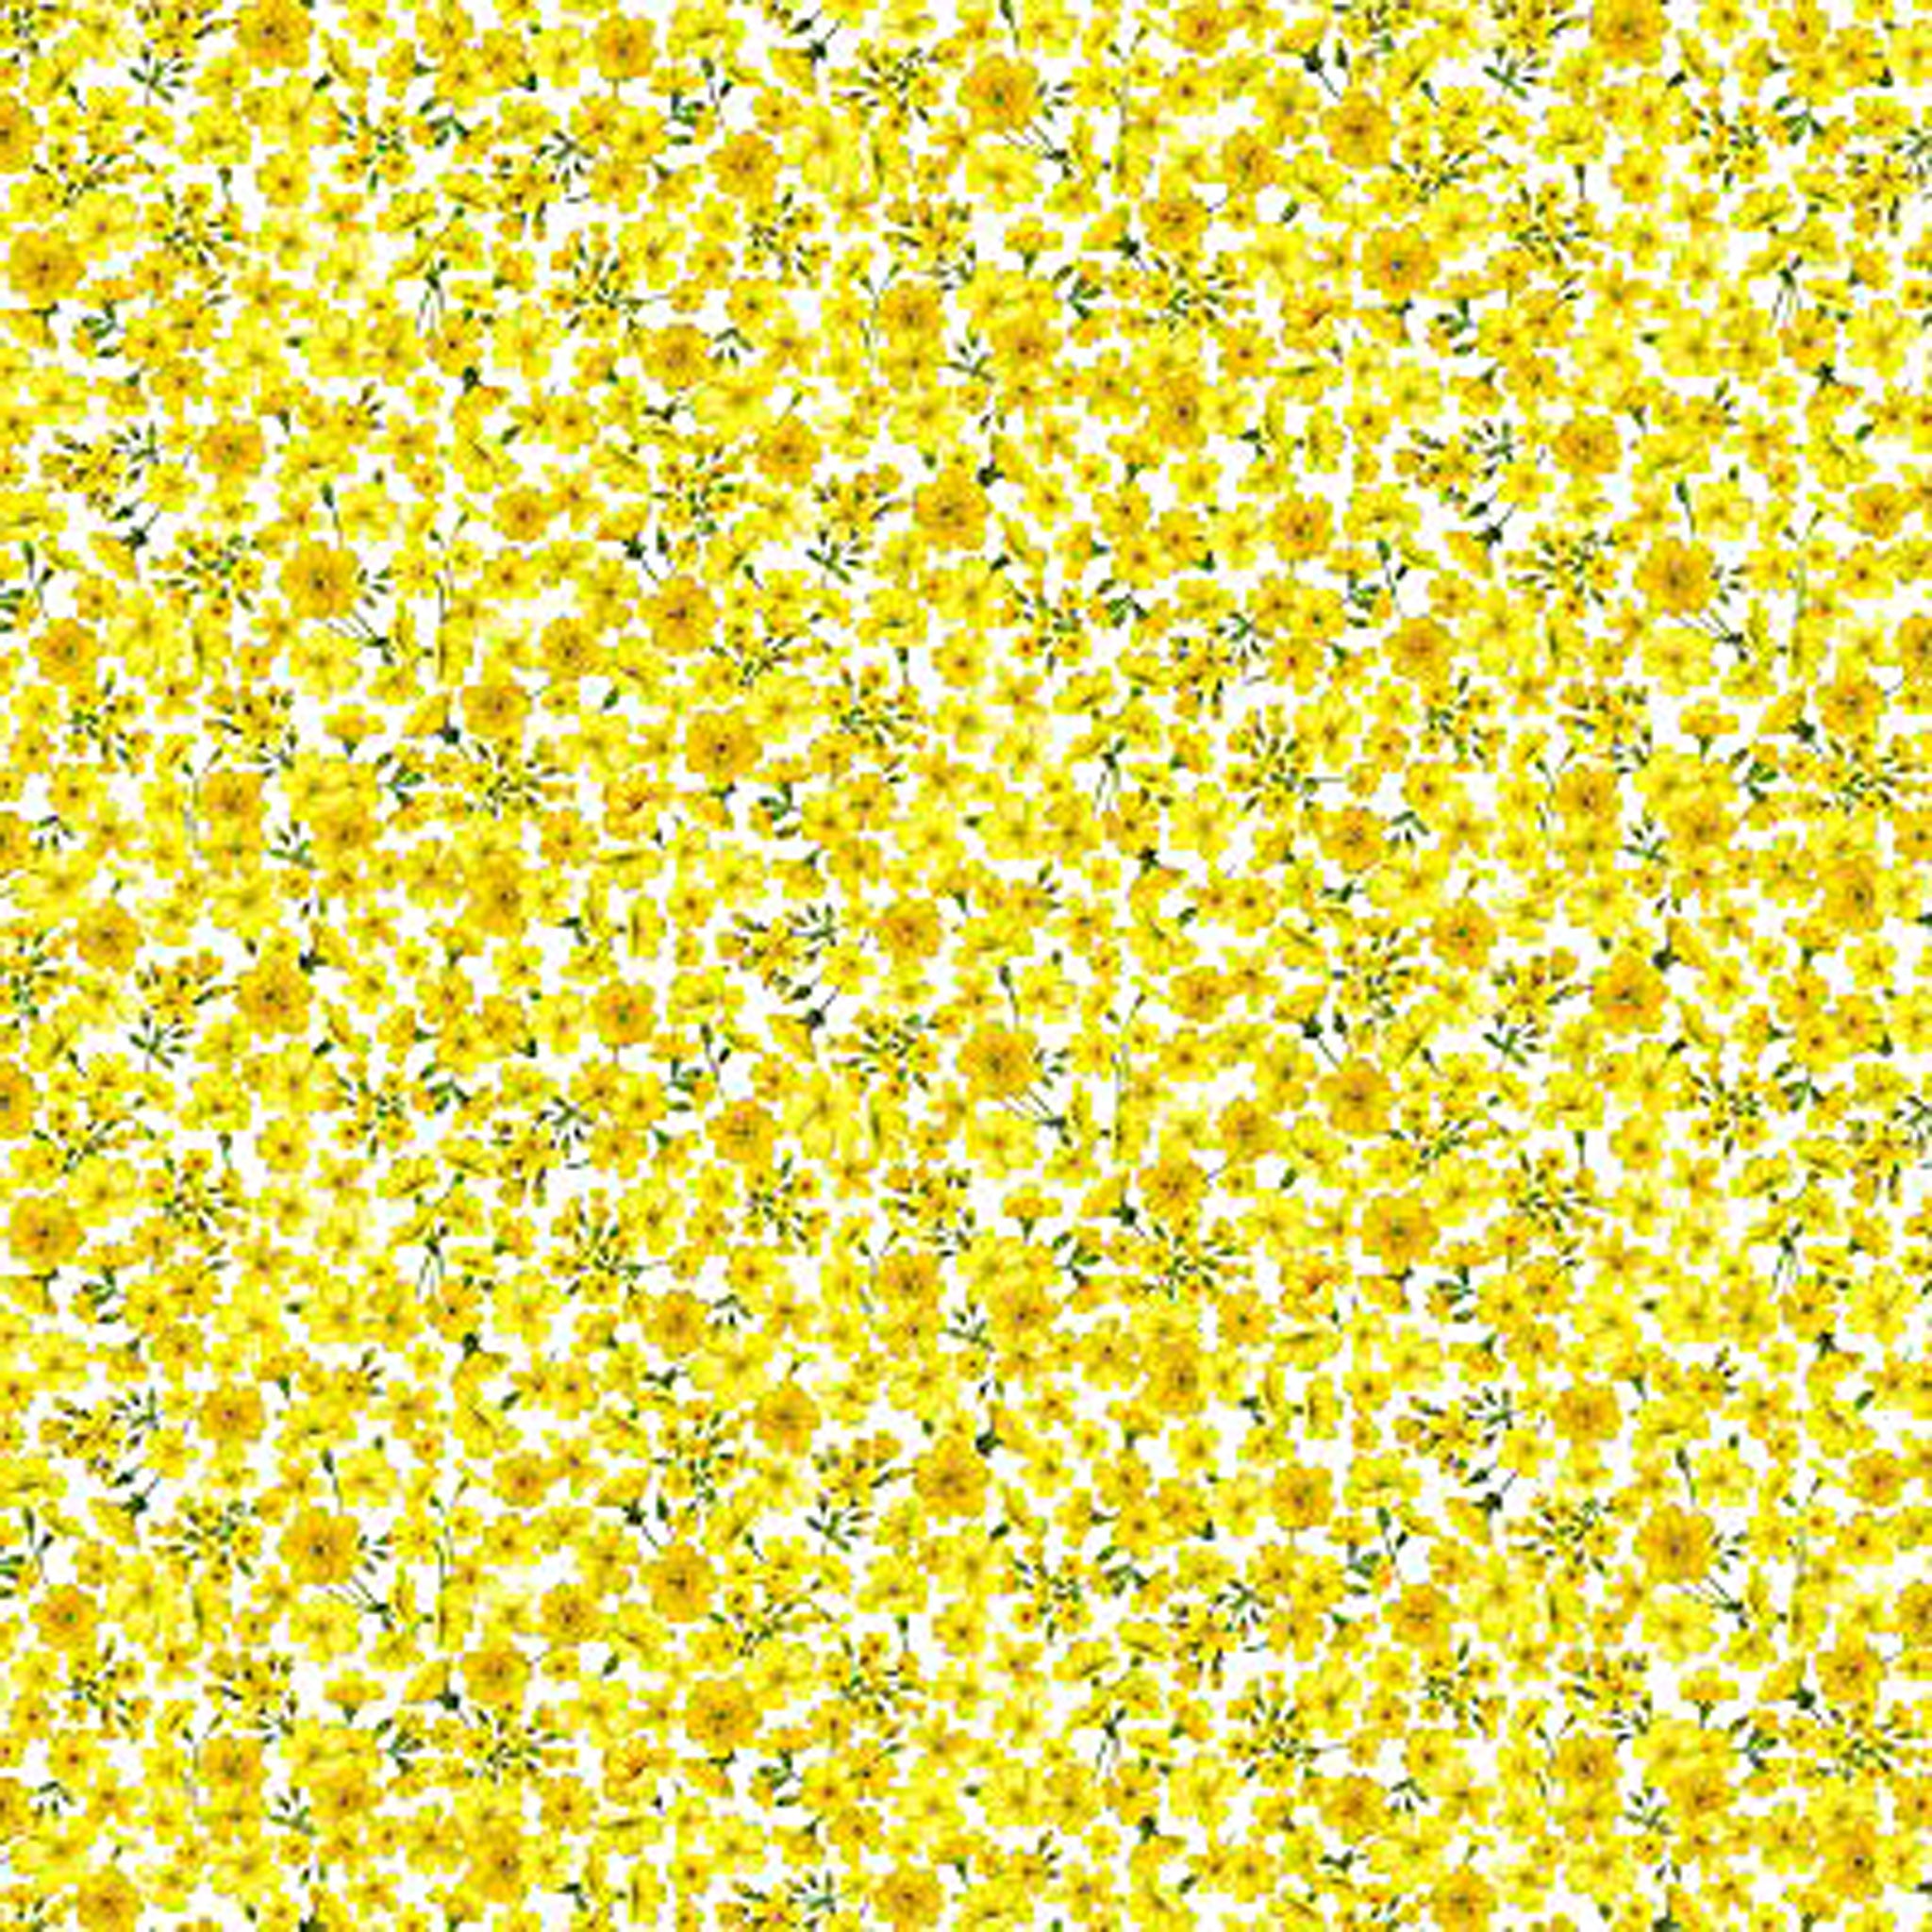 Tonal Floral Cotton Fabric - Yellow - Makower 2547/Y - Summer Days